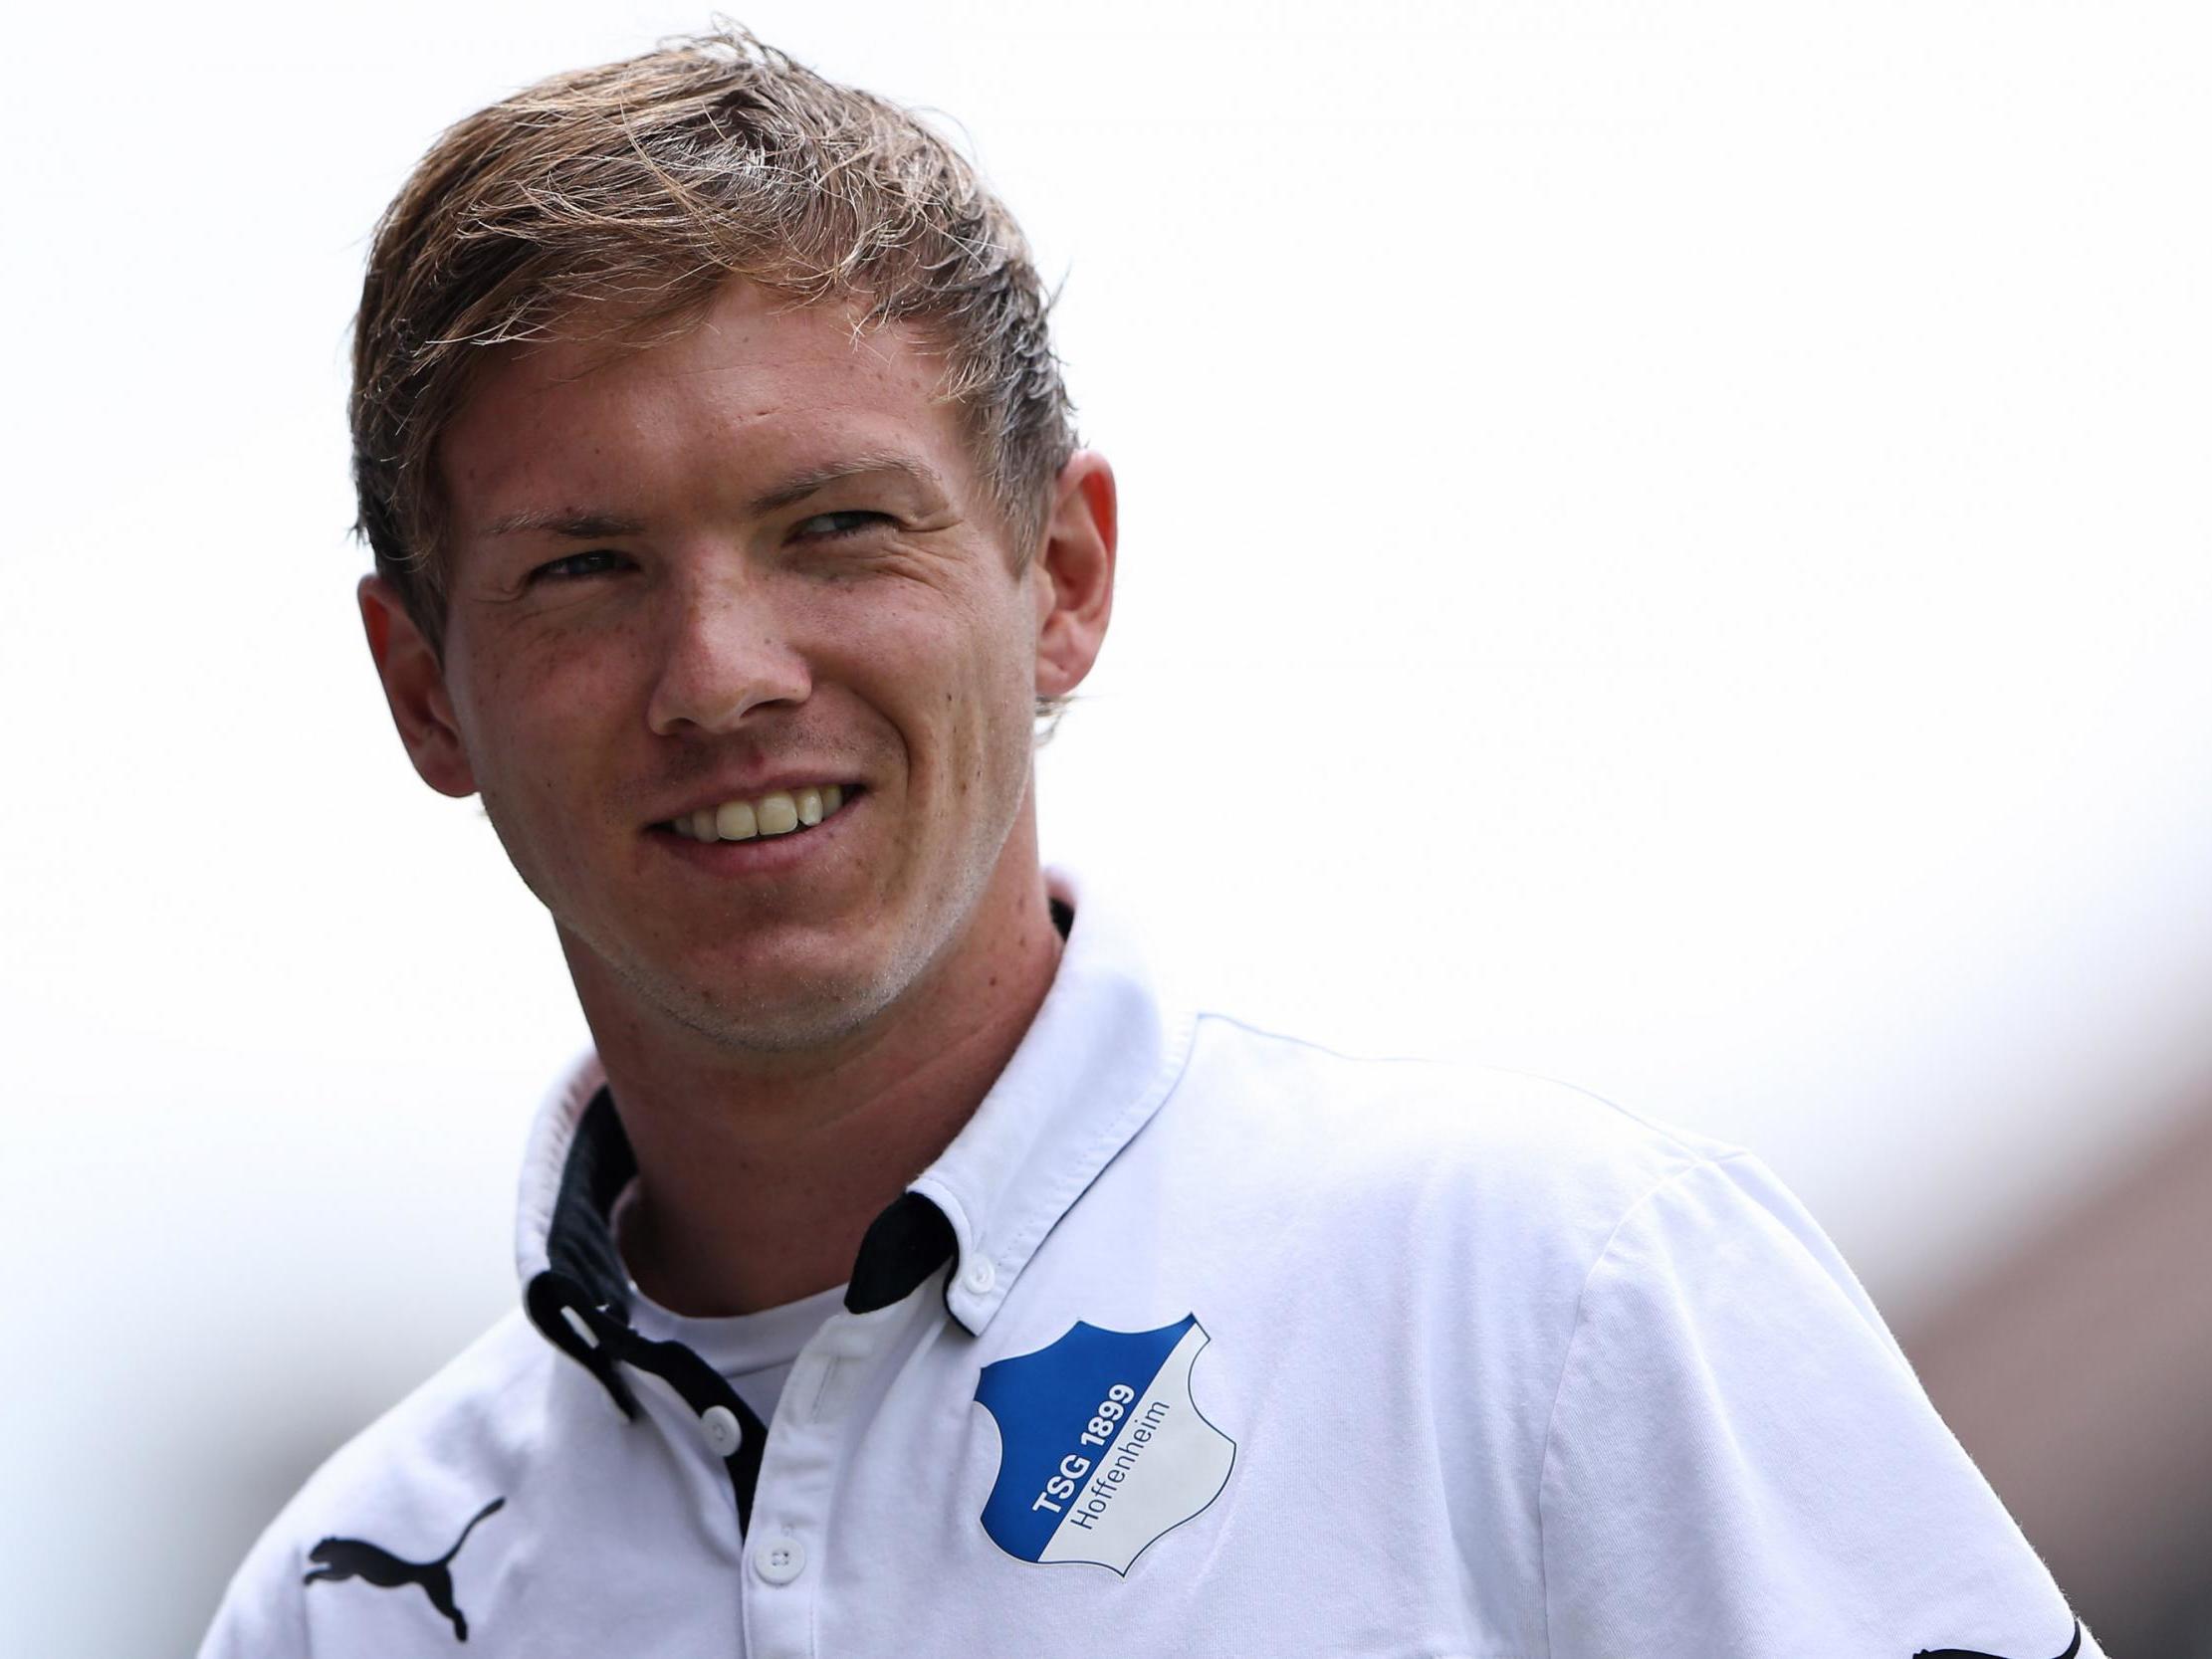 Nagelsmann during his time coaching the youth at Hoffenheim